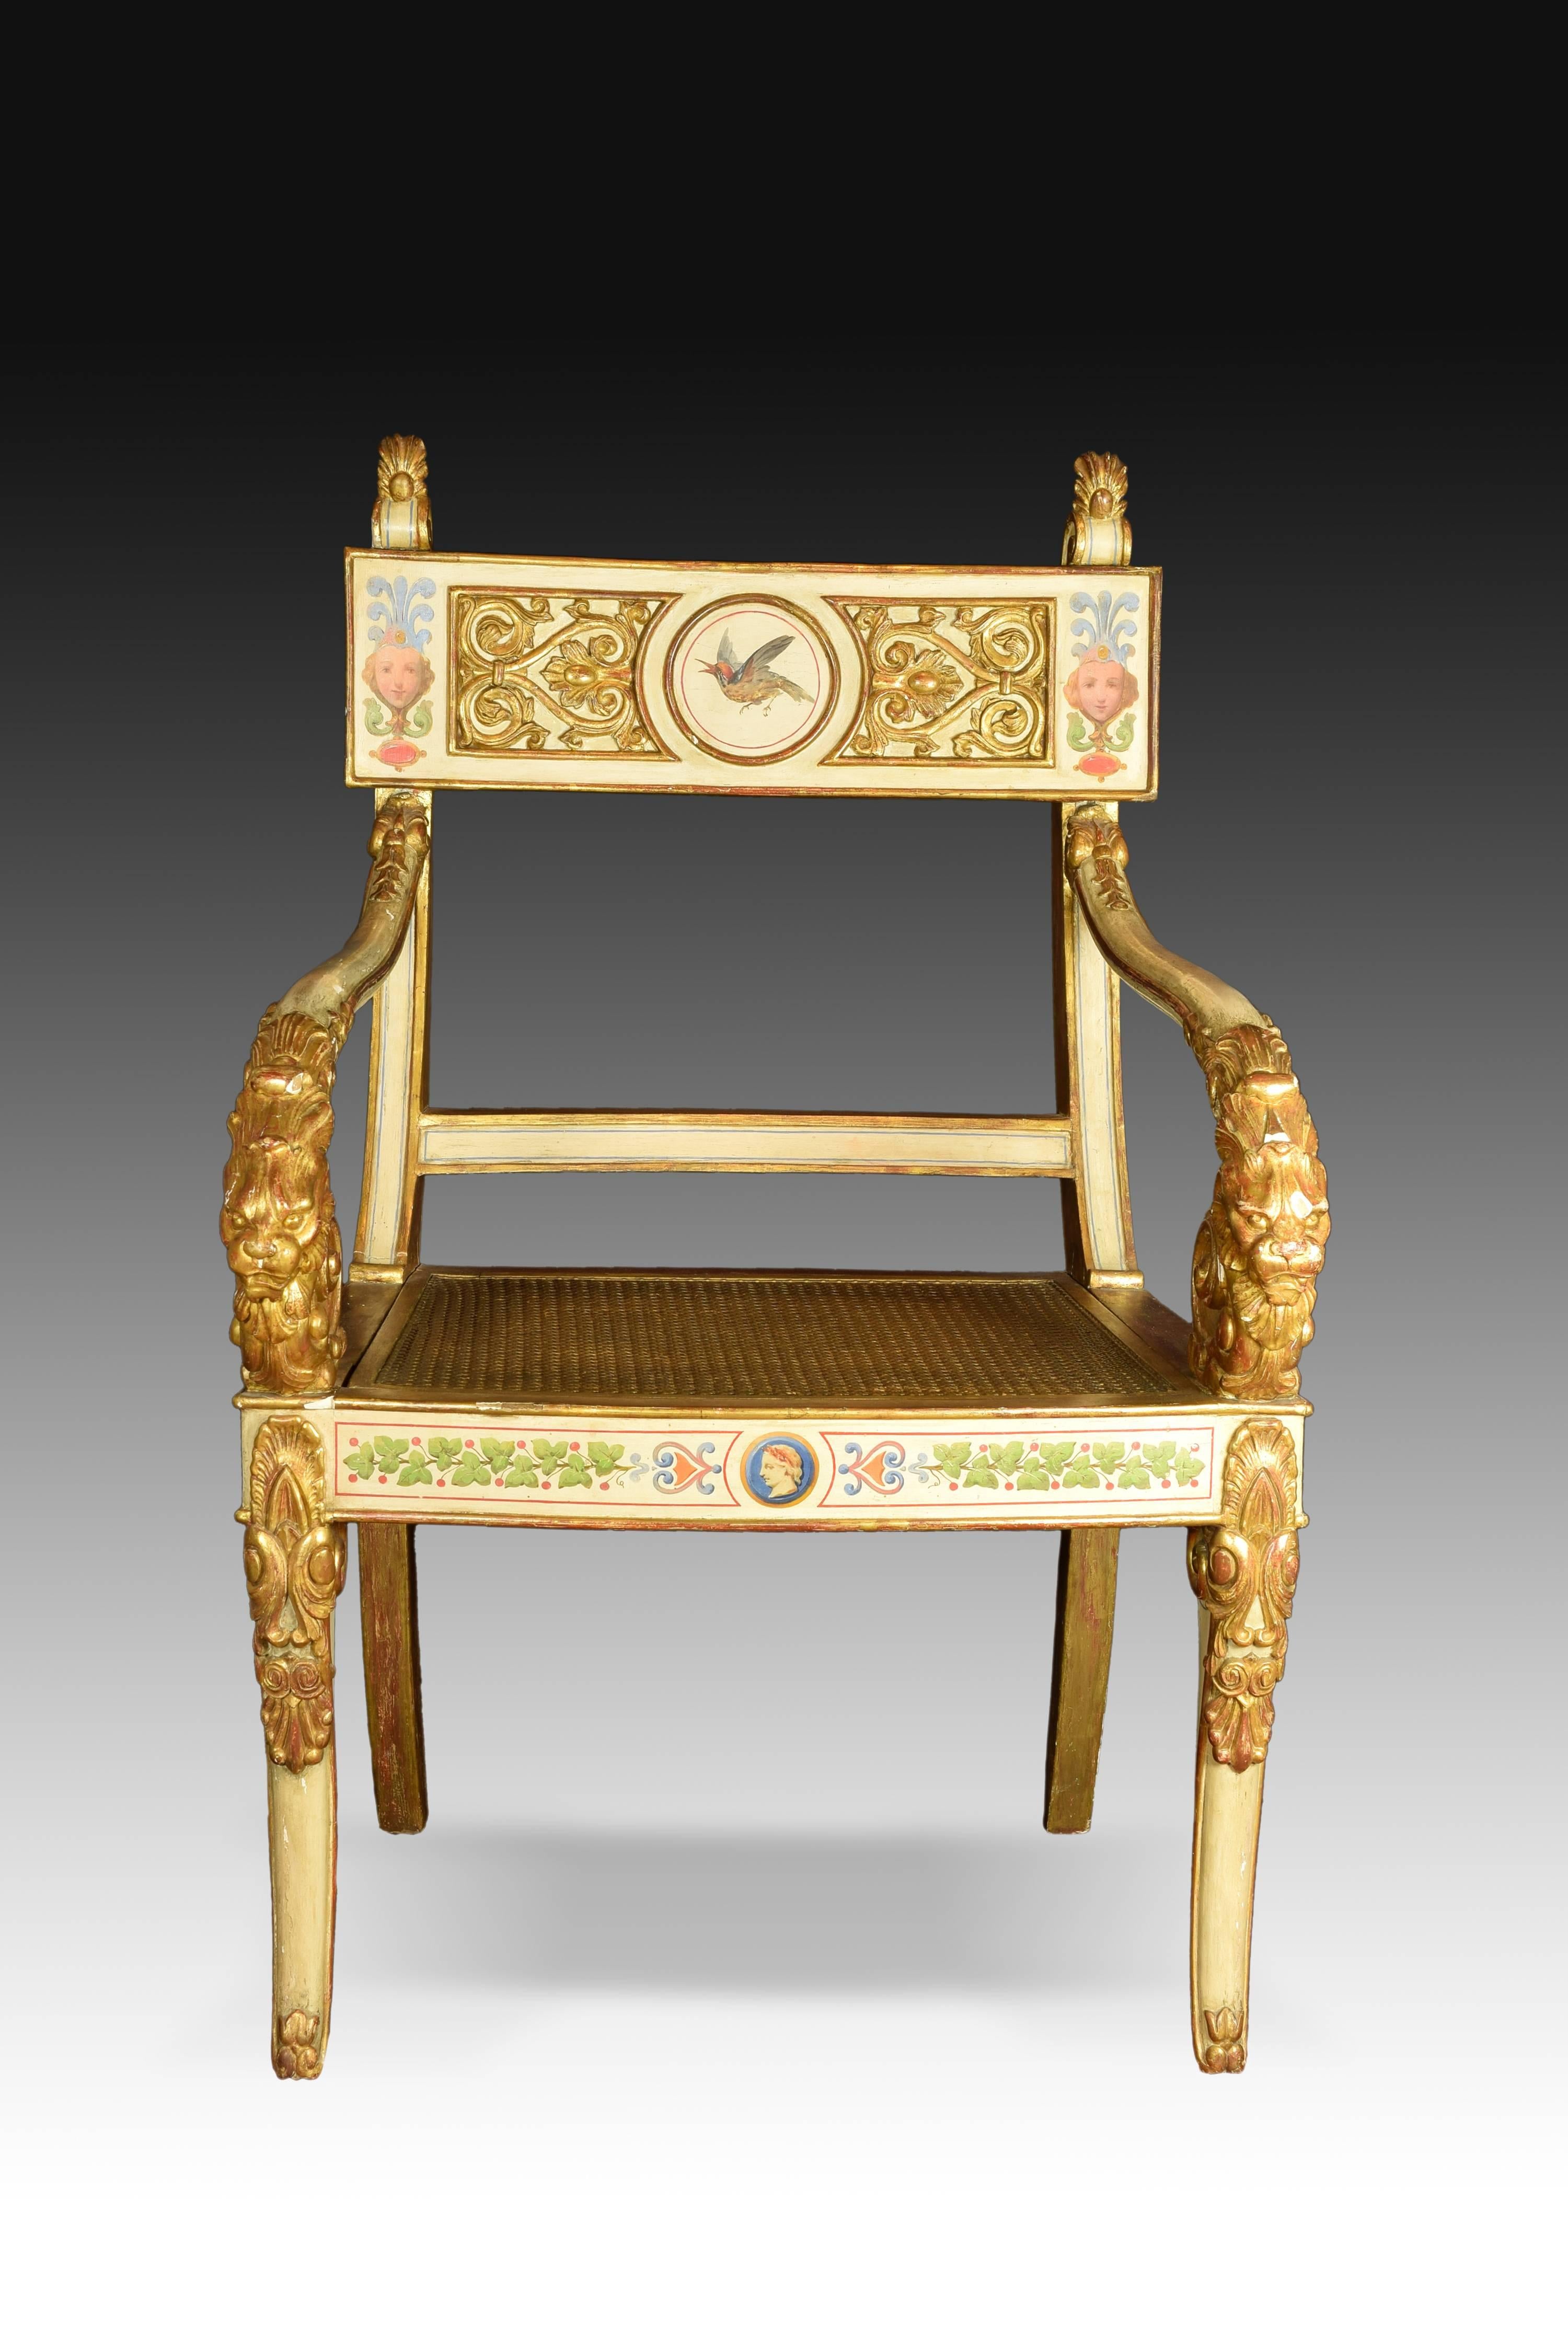 European Furniture Set, Wood Carved, Painted and Gilded, Possibly Spain, 19th Century